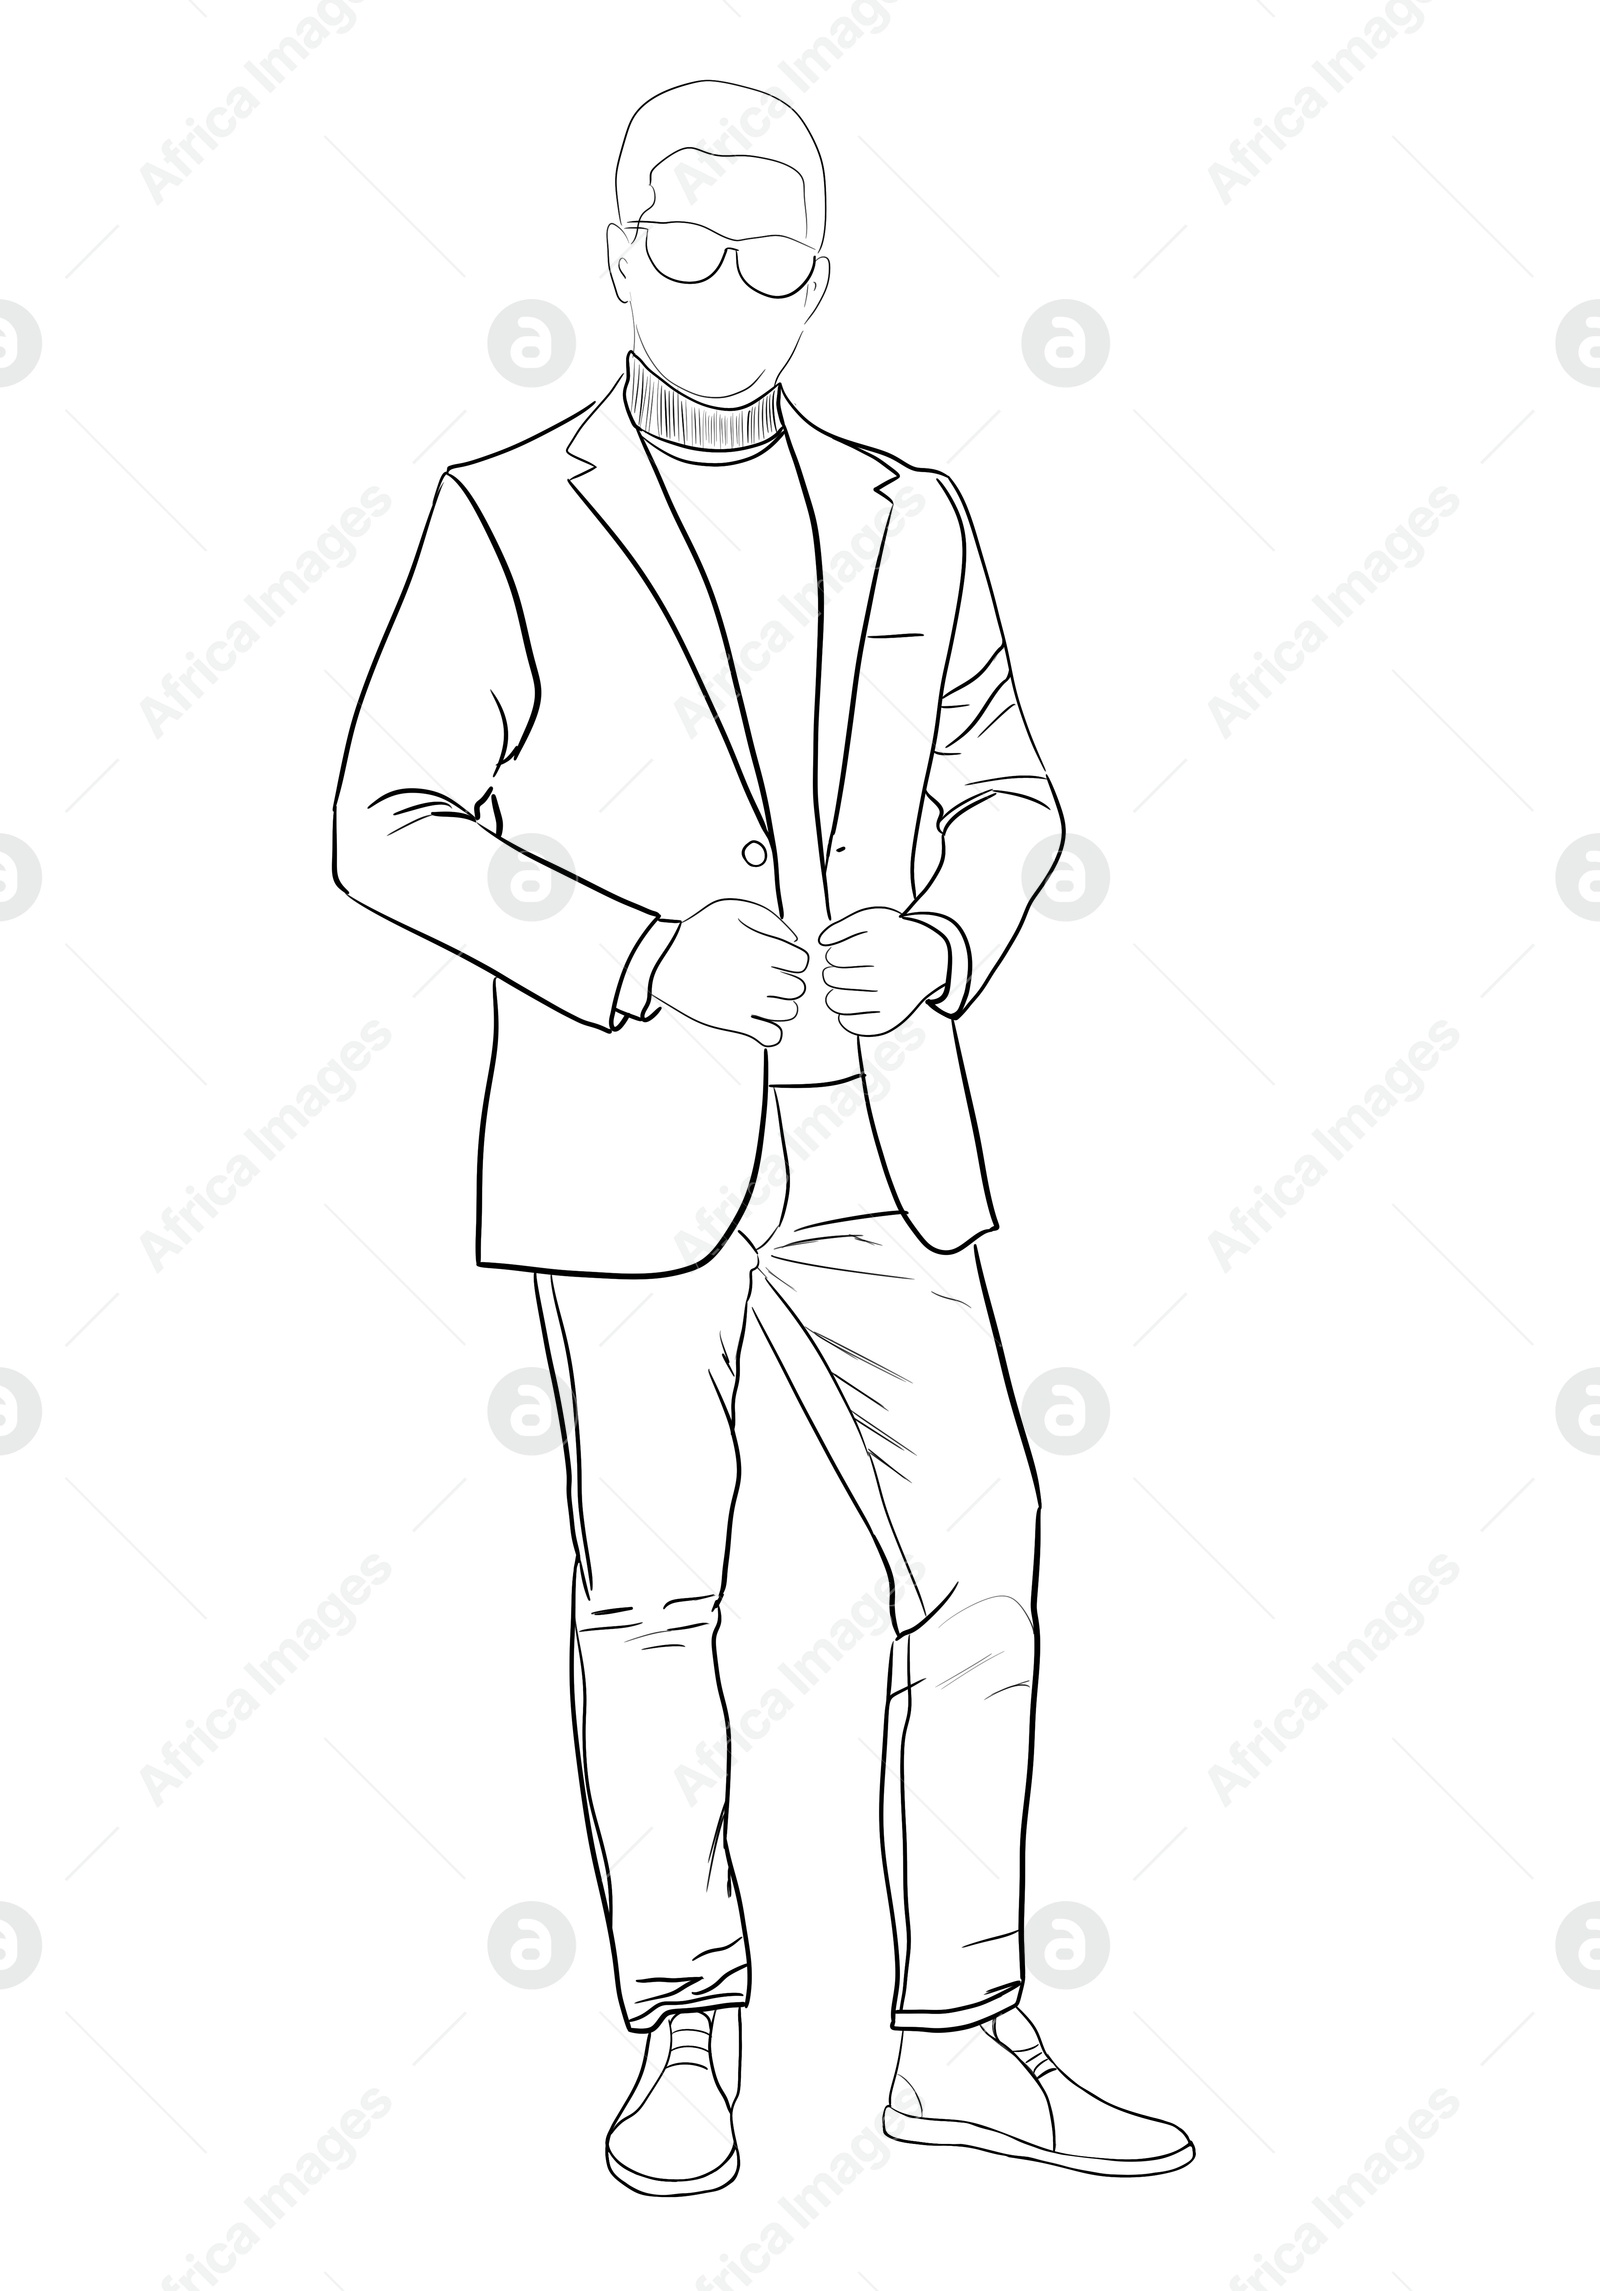 Image of Fashion designer. Sketch of man in stylish clothes on white background